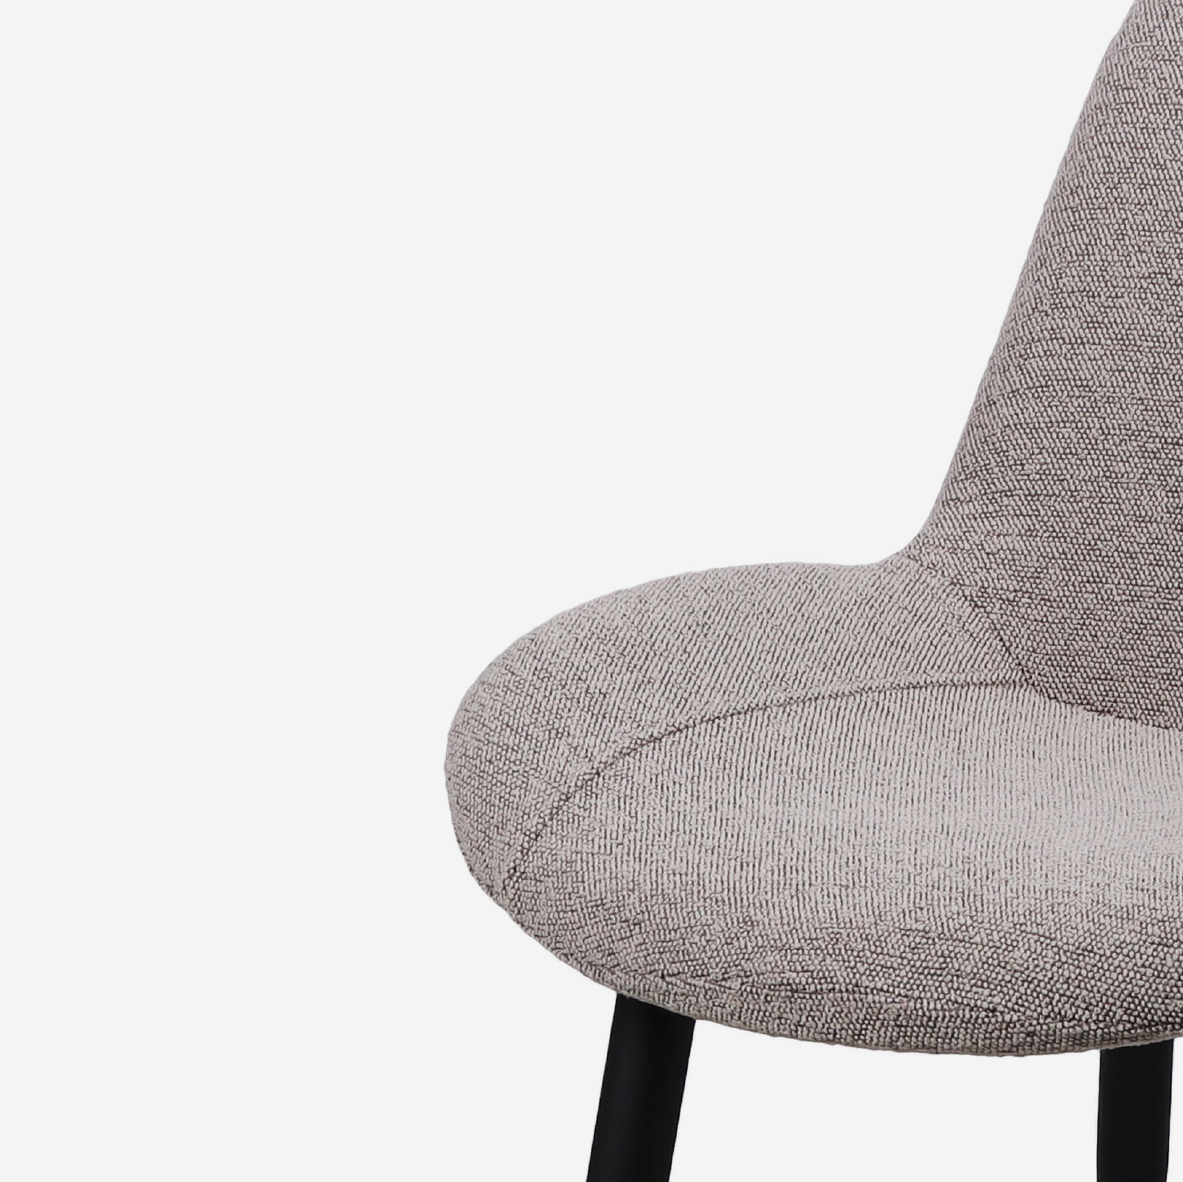 Gladstone Cologne Dining Chair - Dove